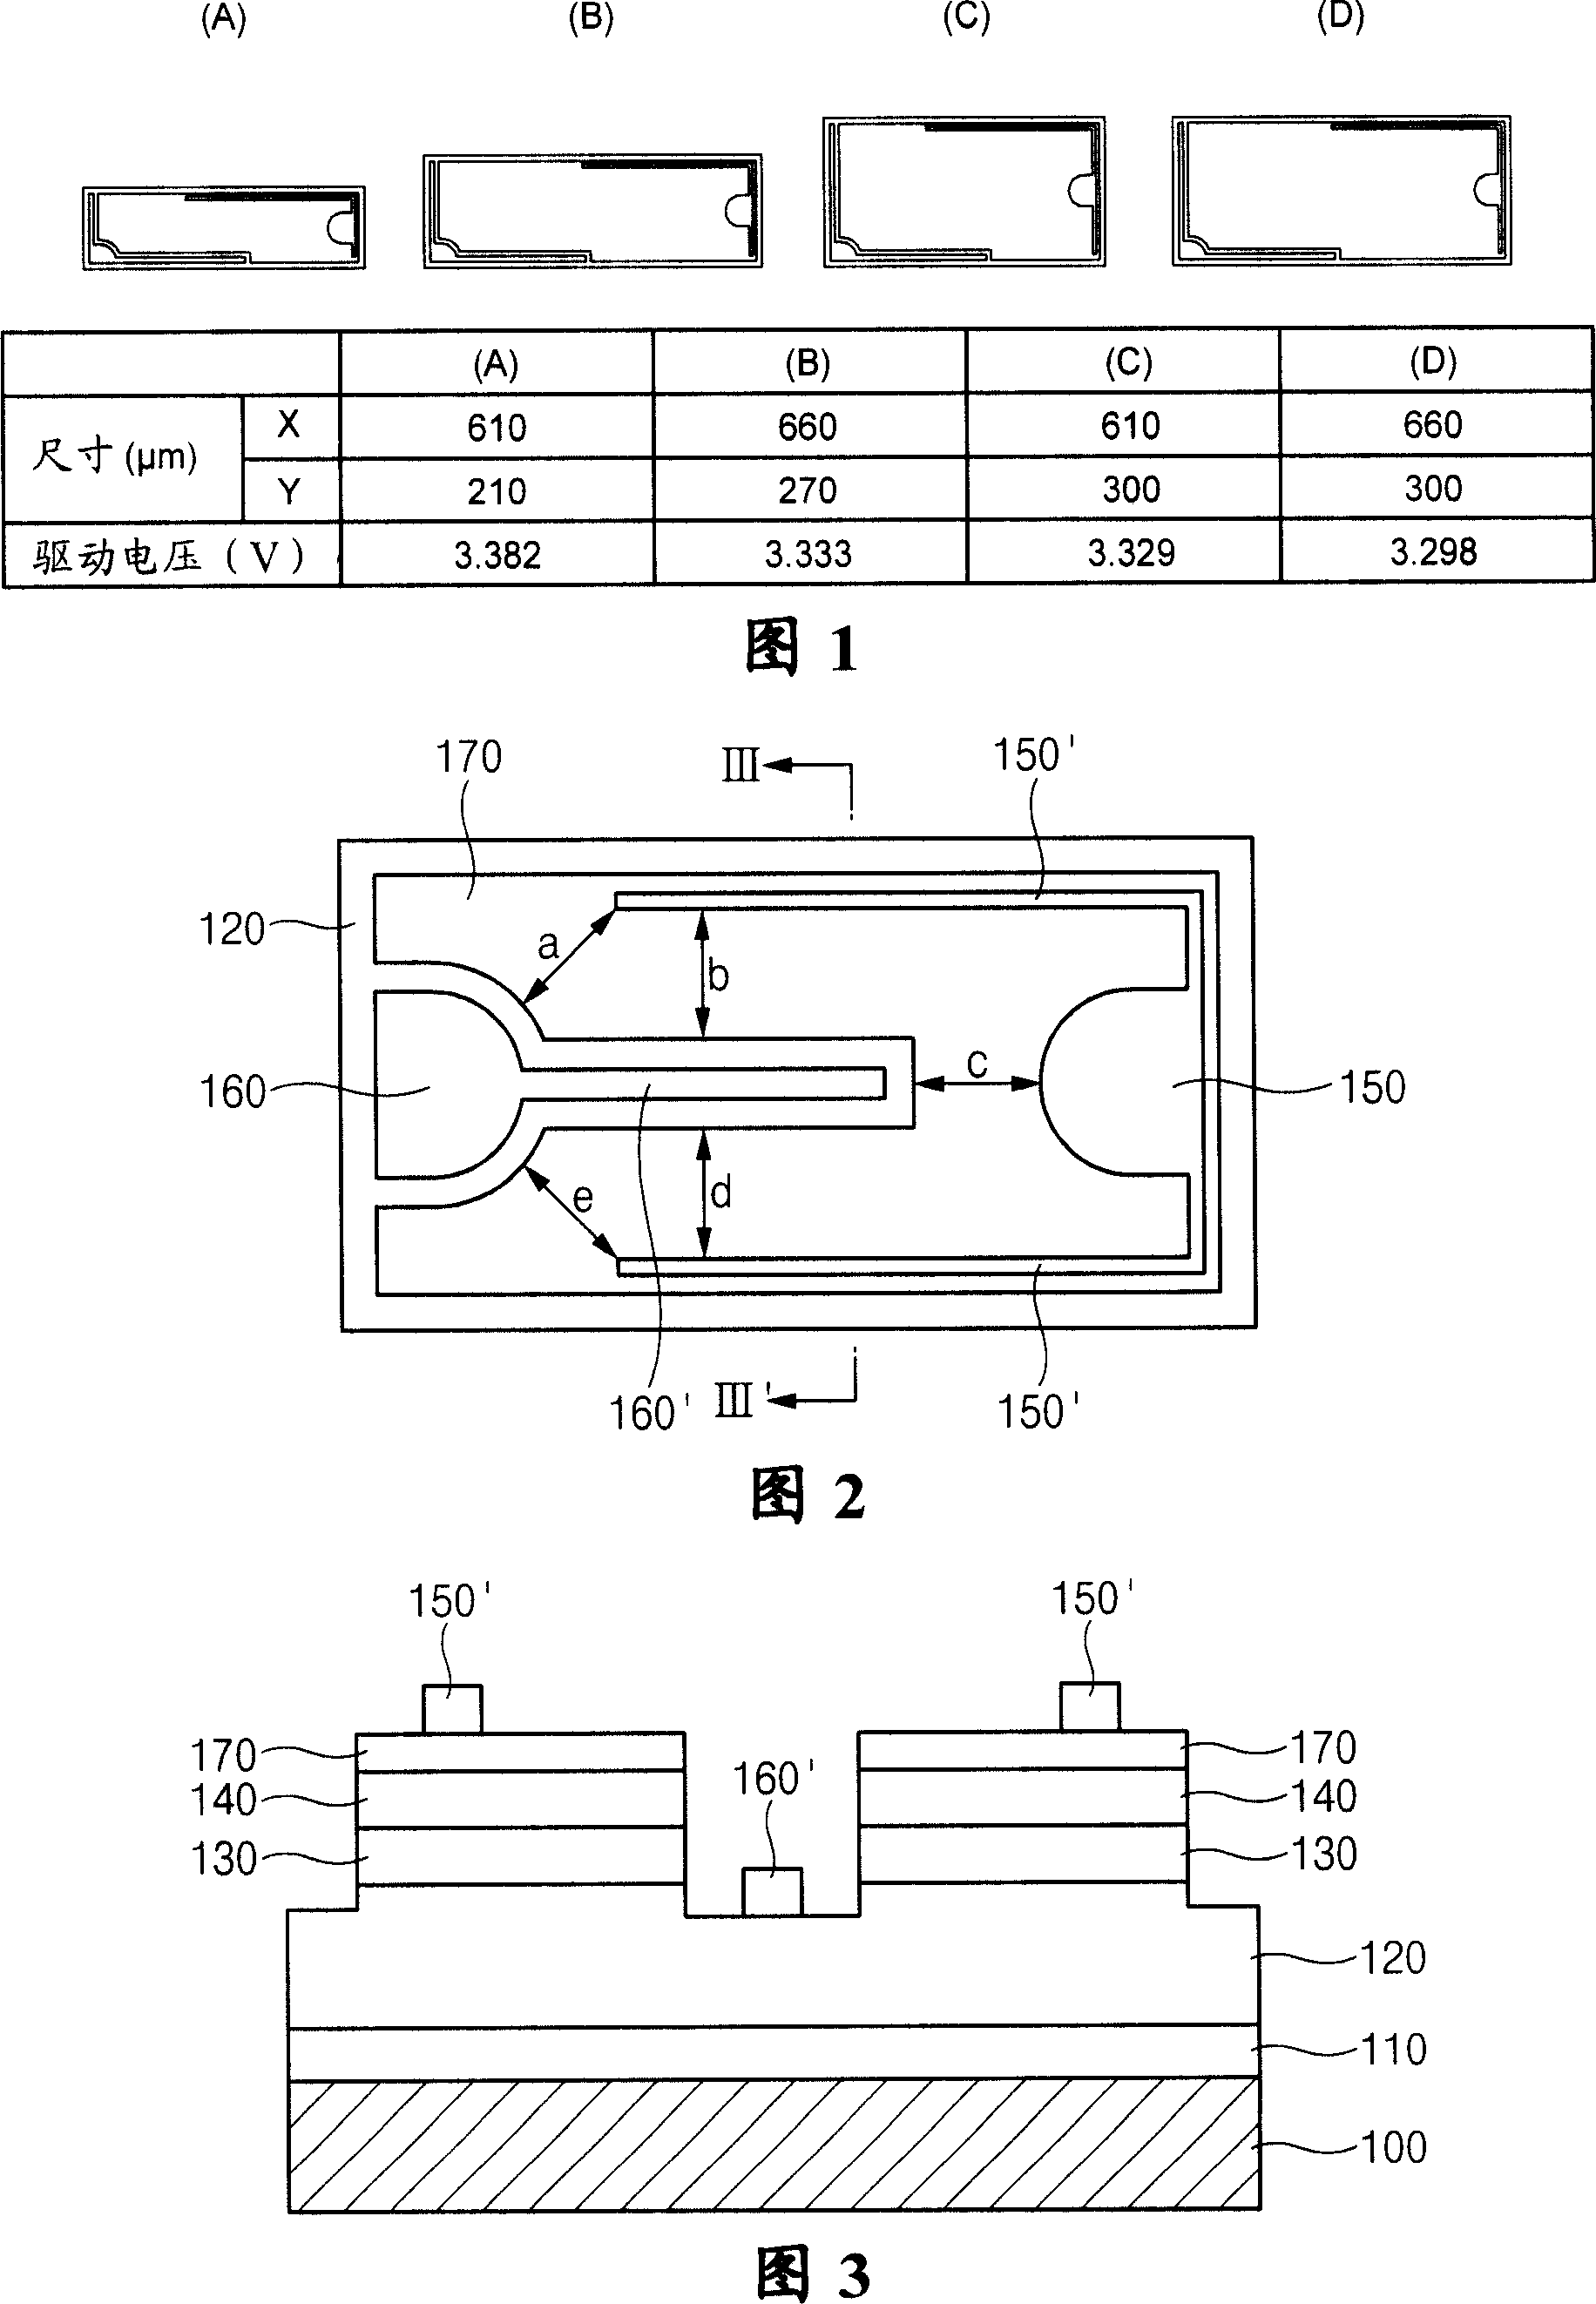 Nitride semiconductor light-emitting diode